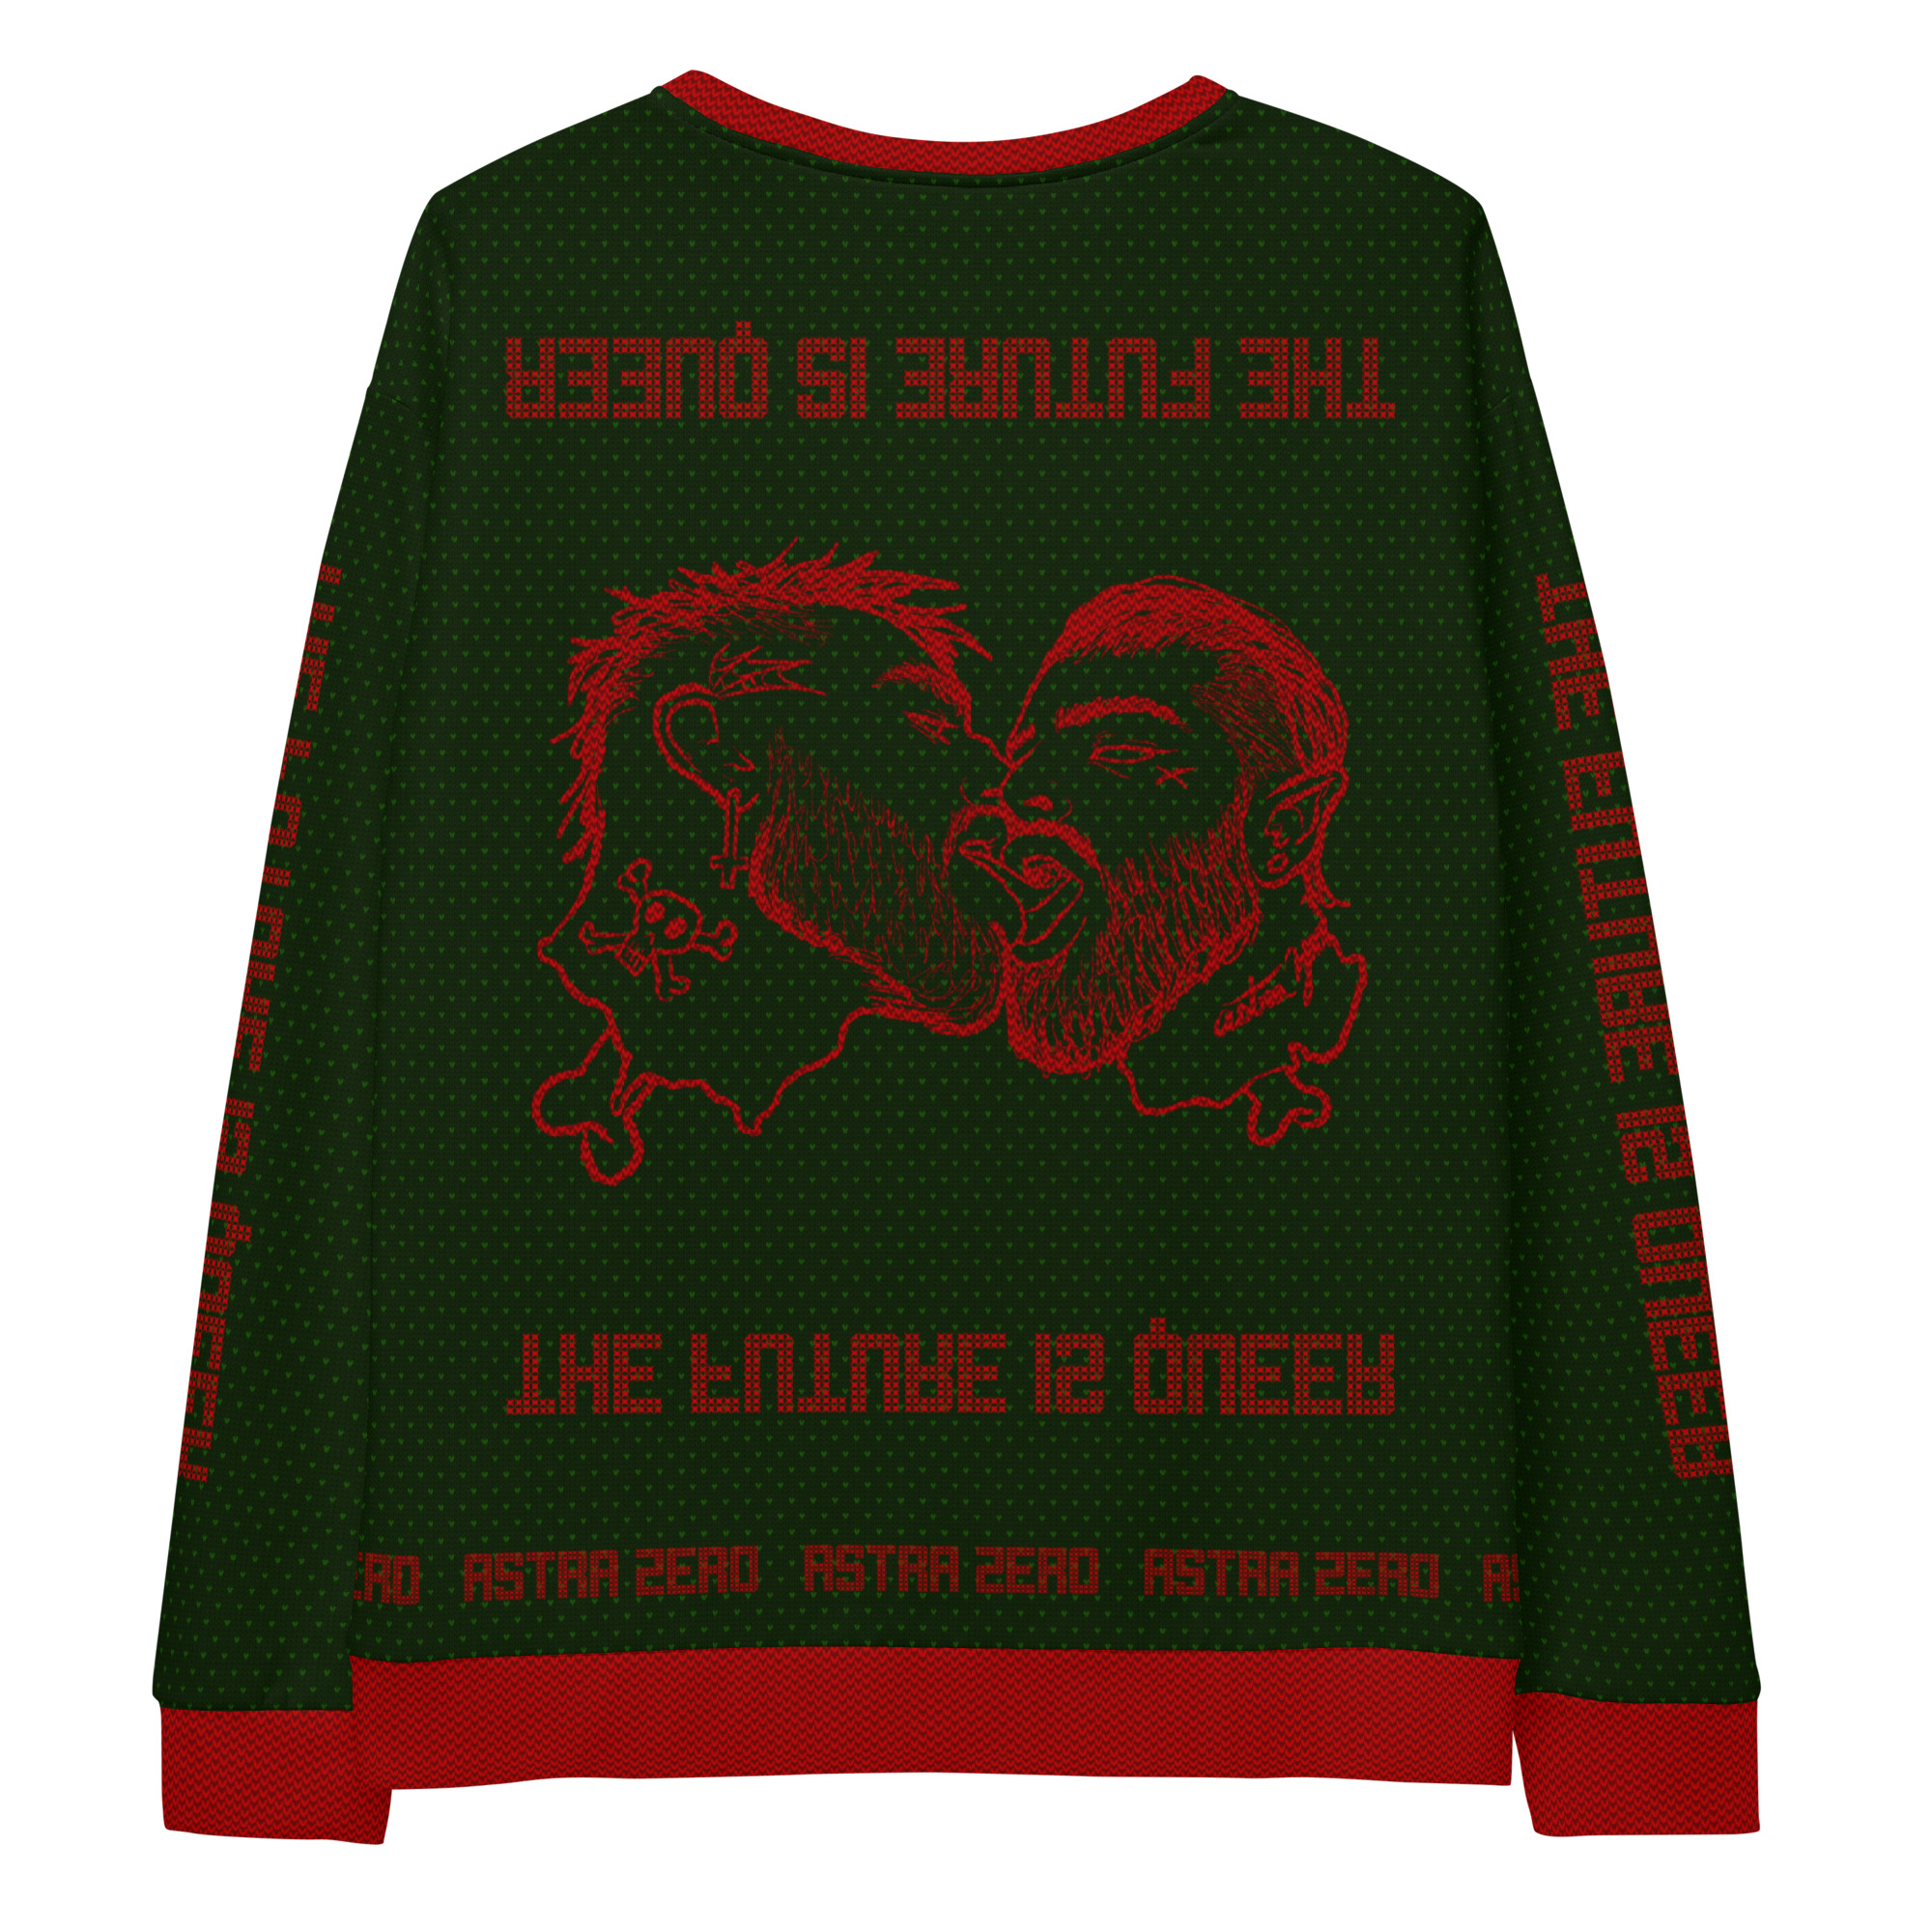 Featured image for “Ugly Xmas Future is queer - Sweatshirt”